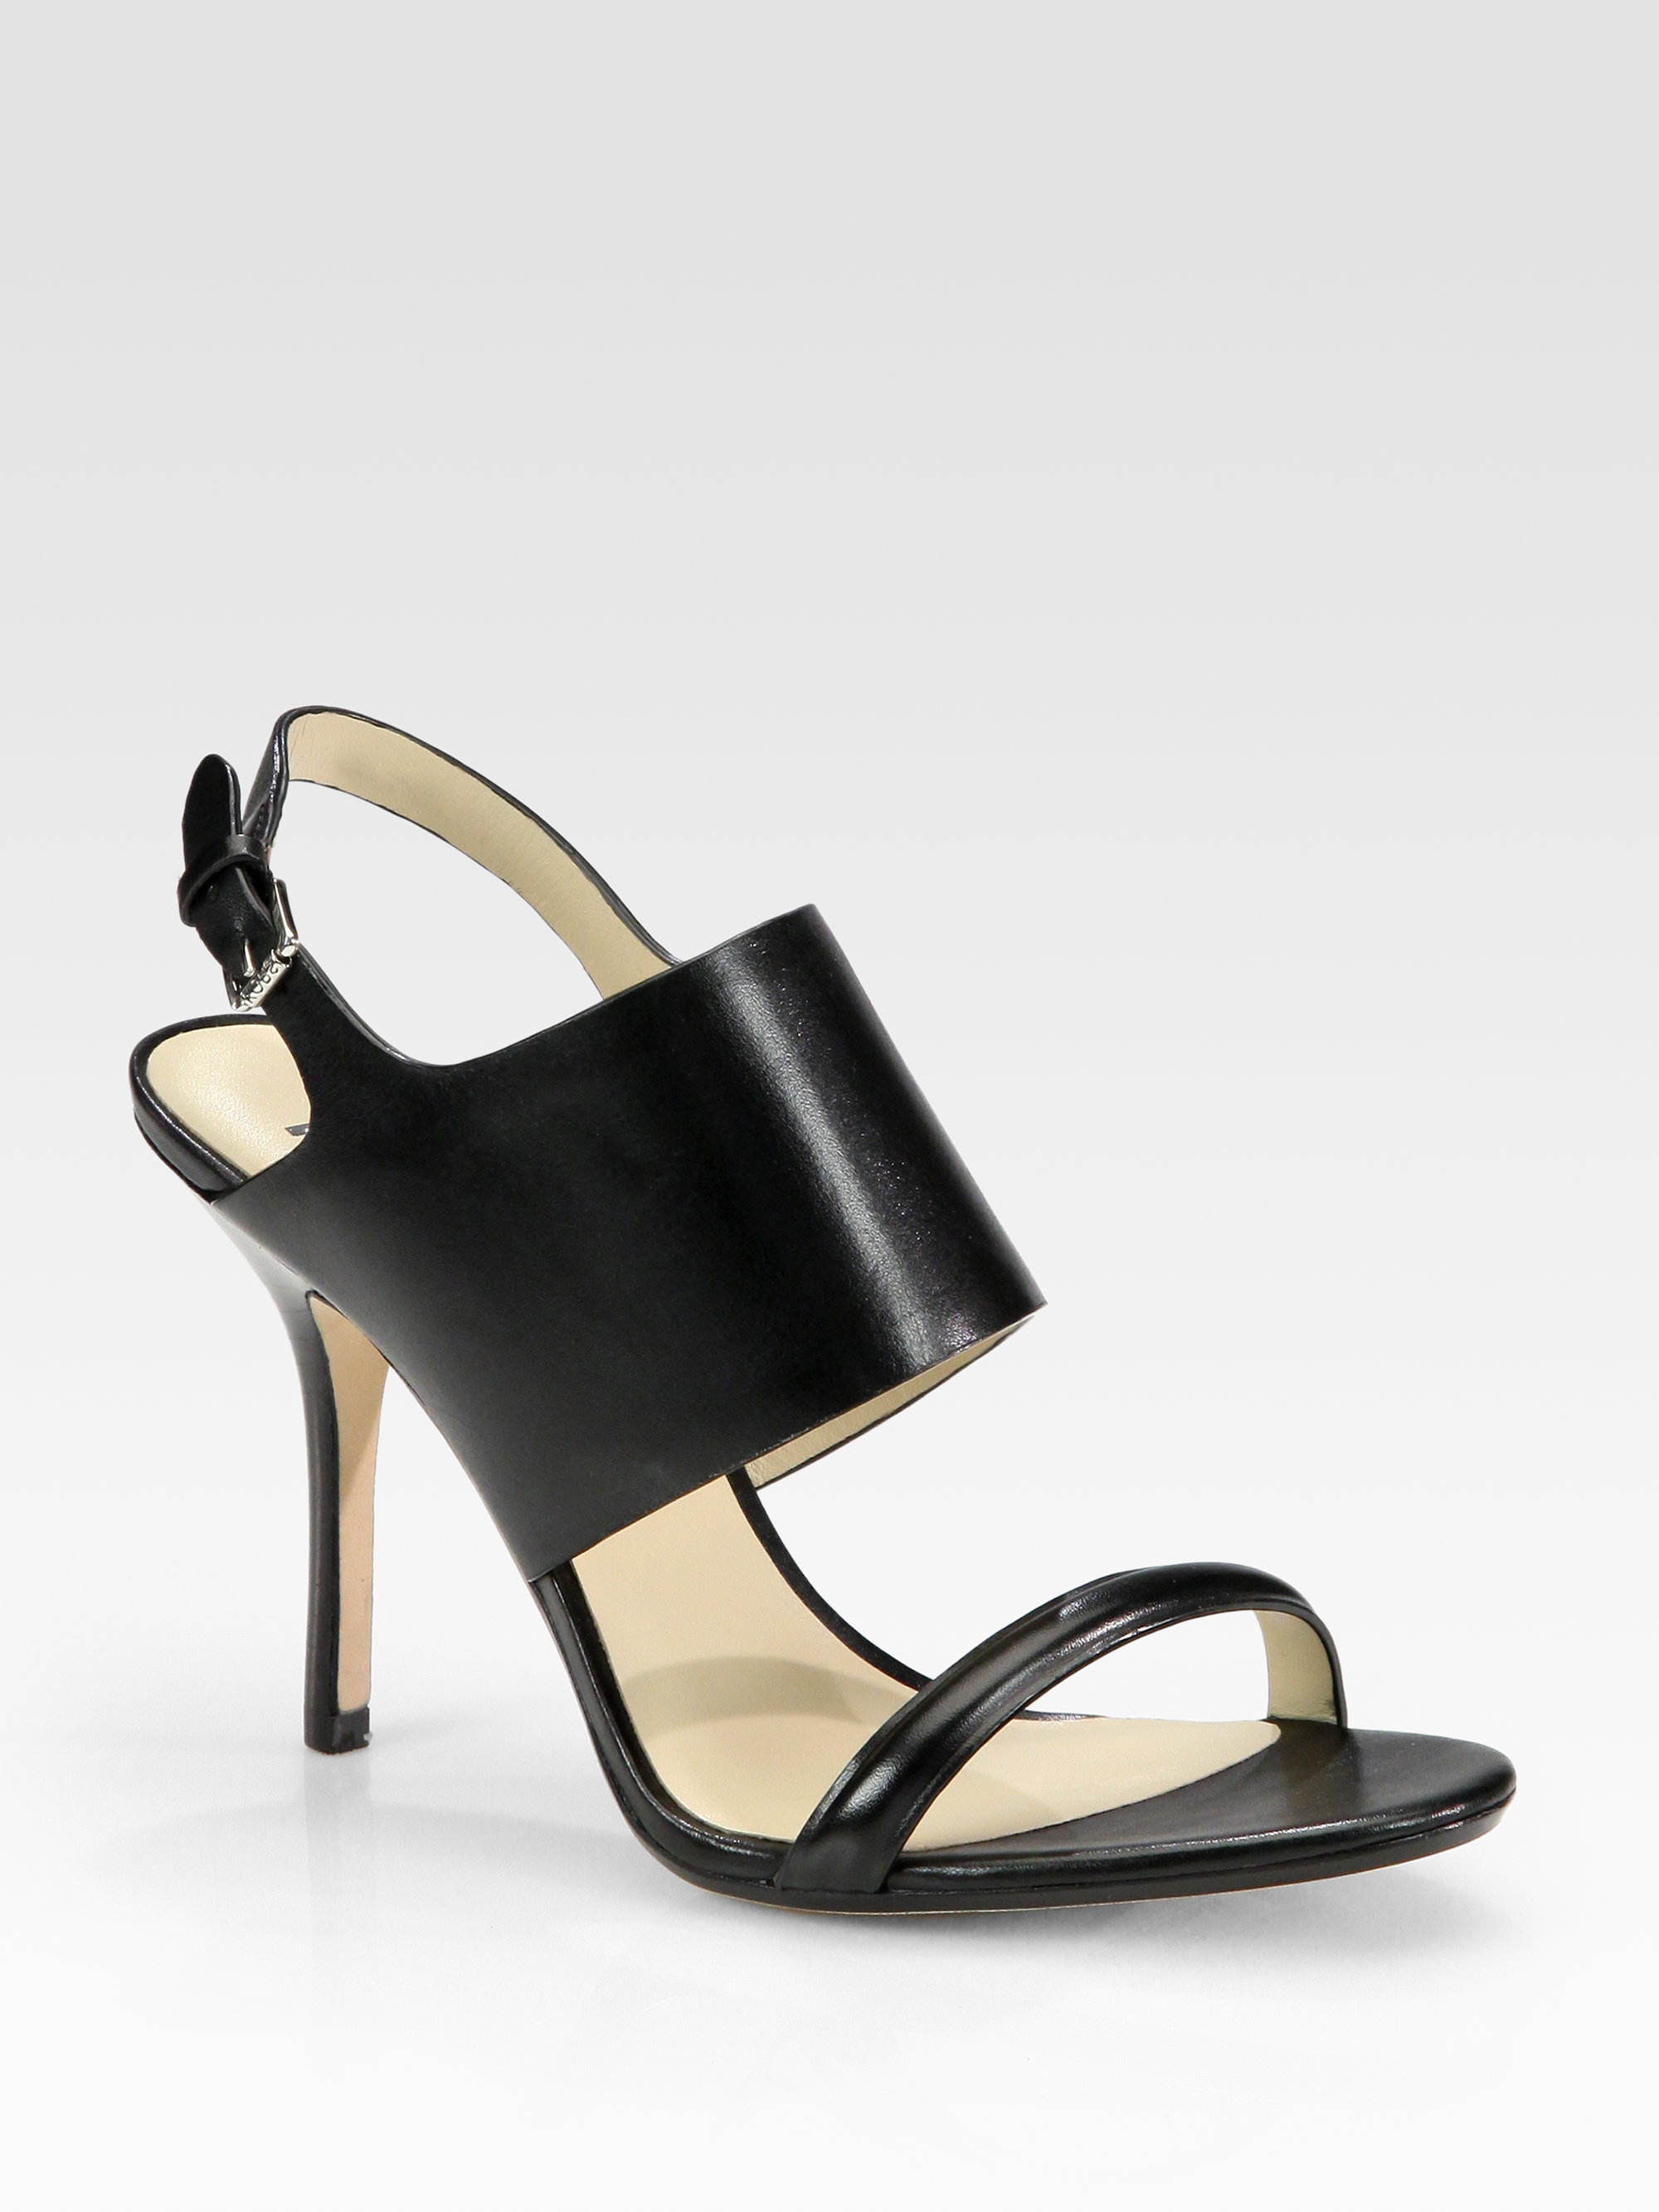 Lyst - Kors By Michael Kors Hutton Leather Slingback Sandals in Black